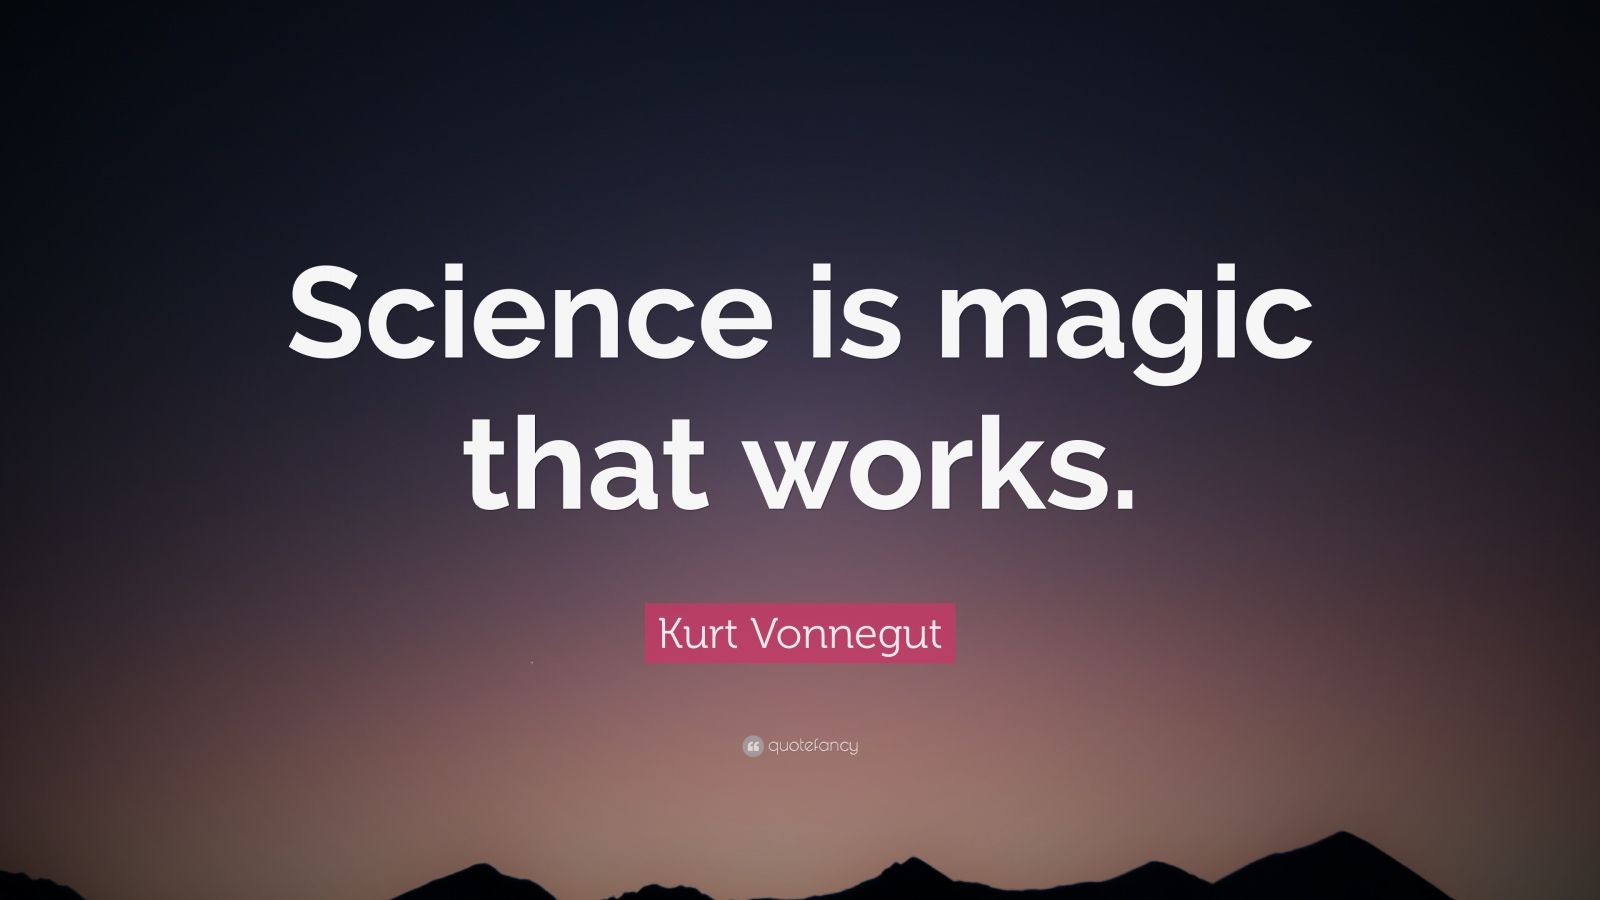 Kurt Vonnegut Quote: “Science is magic that works.” (12 wallpapers ...